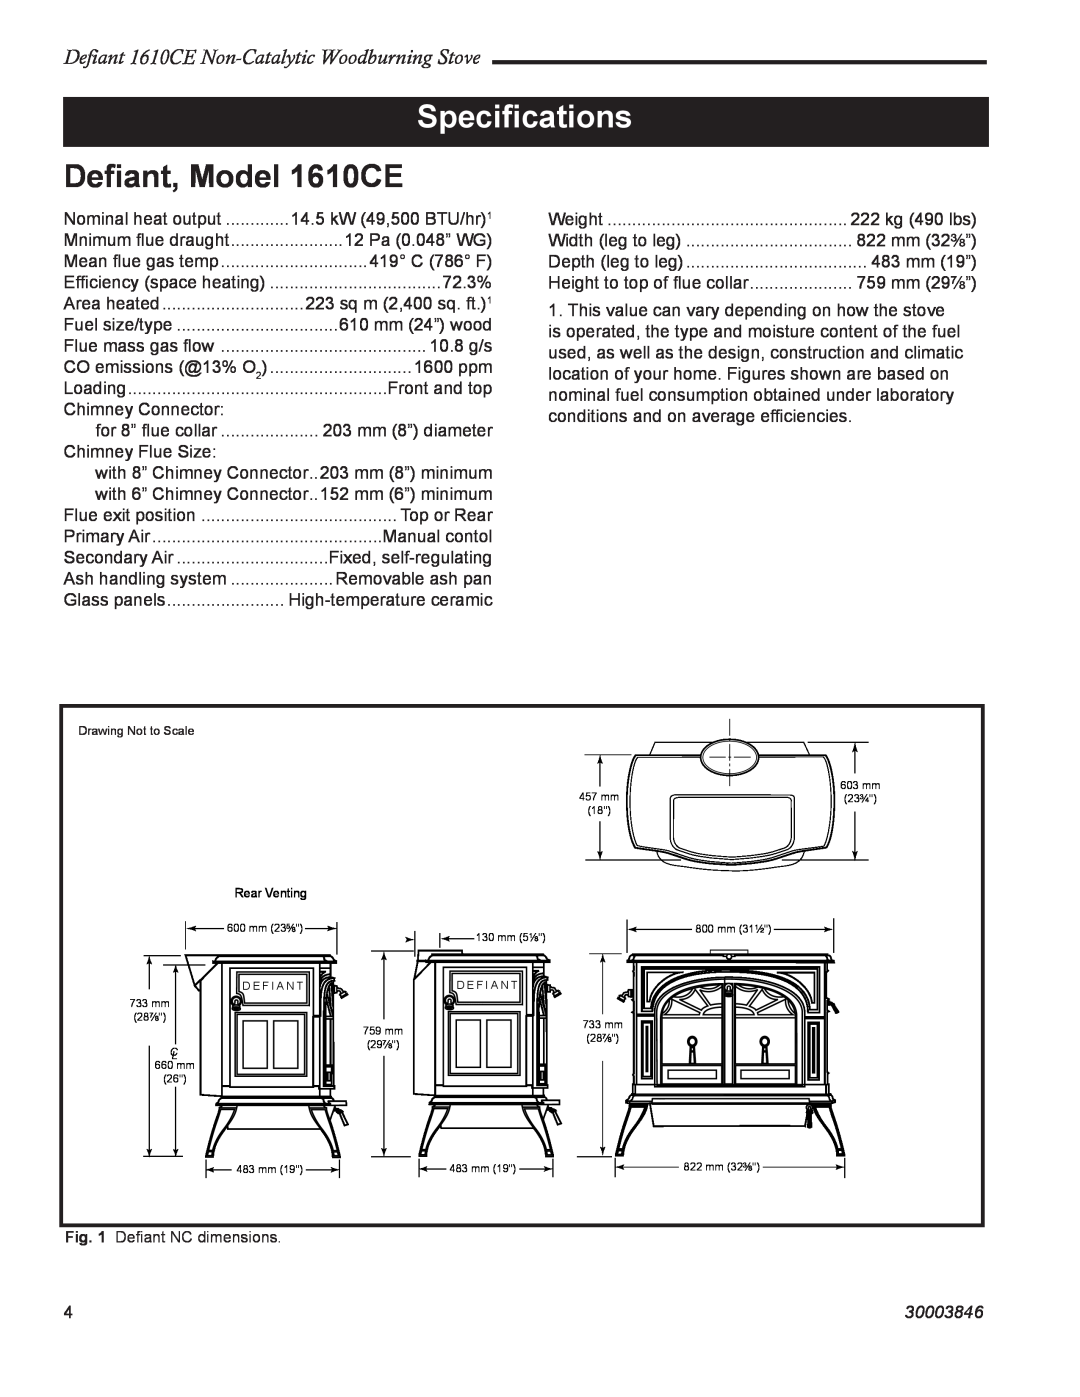 Vermont Casting Speciﬁcations, Deﬁant, Model 1610CE, Defiant 1610CE Non-CatalyticWoodburning Stove, 30003846 